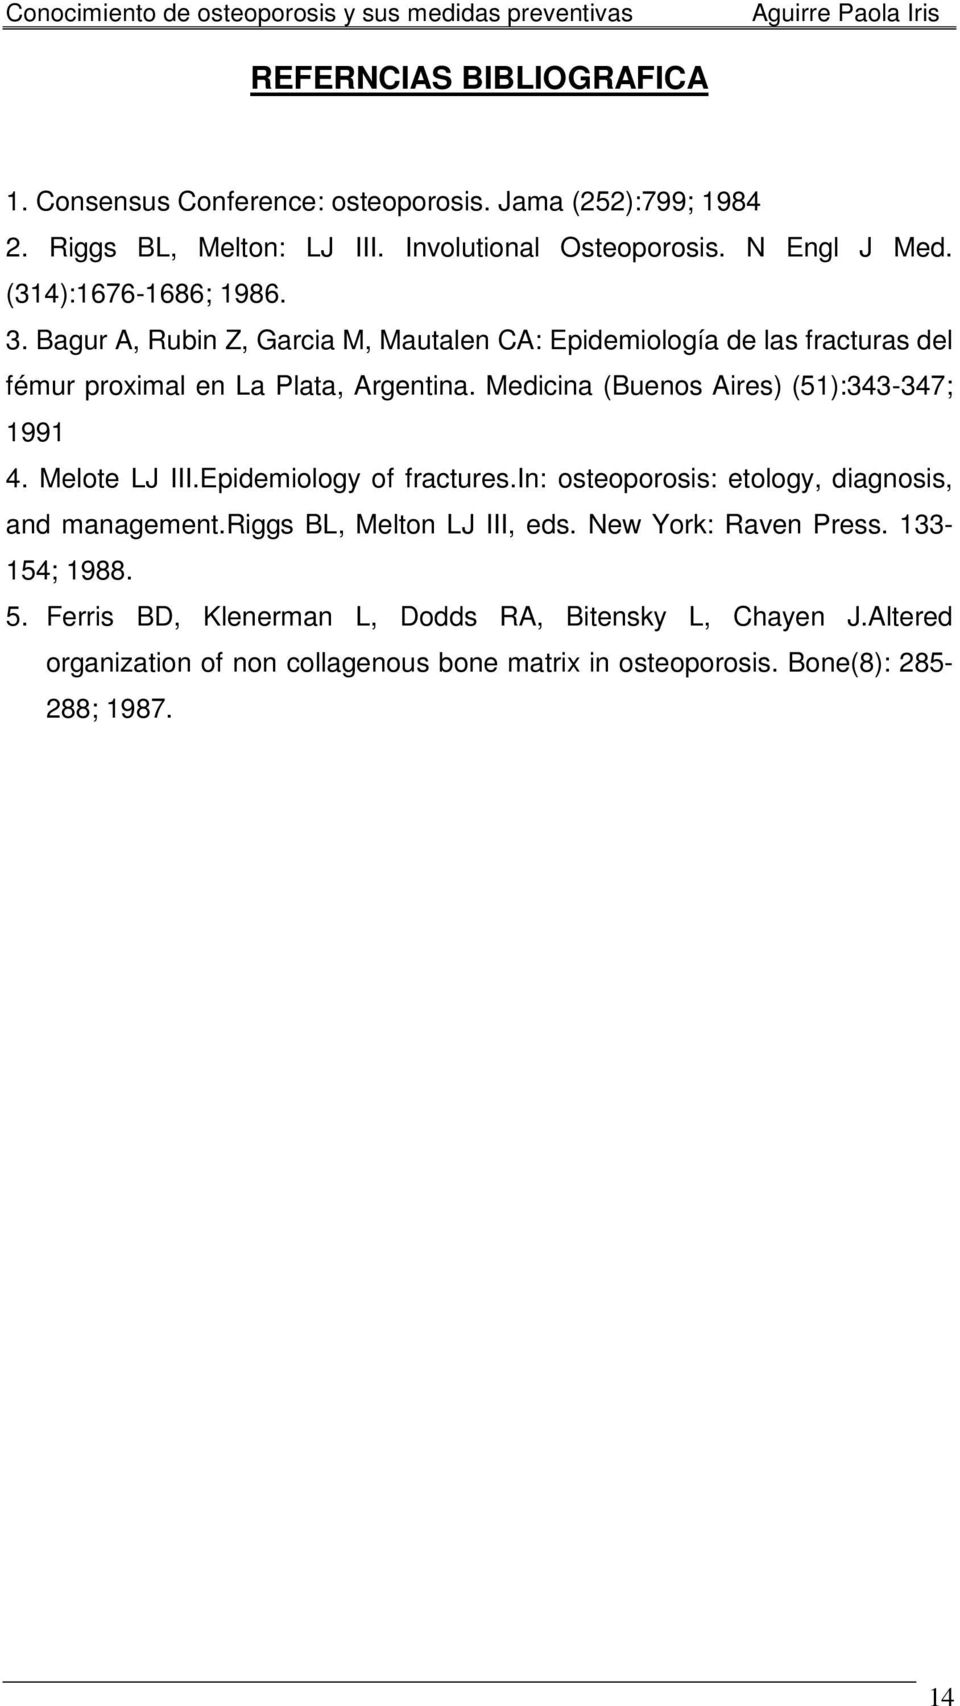 Medicina (Buenos Aires) (51):343-347; 1991 4. Melote LJ III.Epidemiology of fractures.in: osteoporosis: etology, diagnosis, and management.